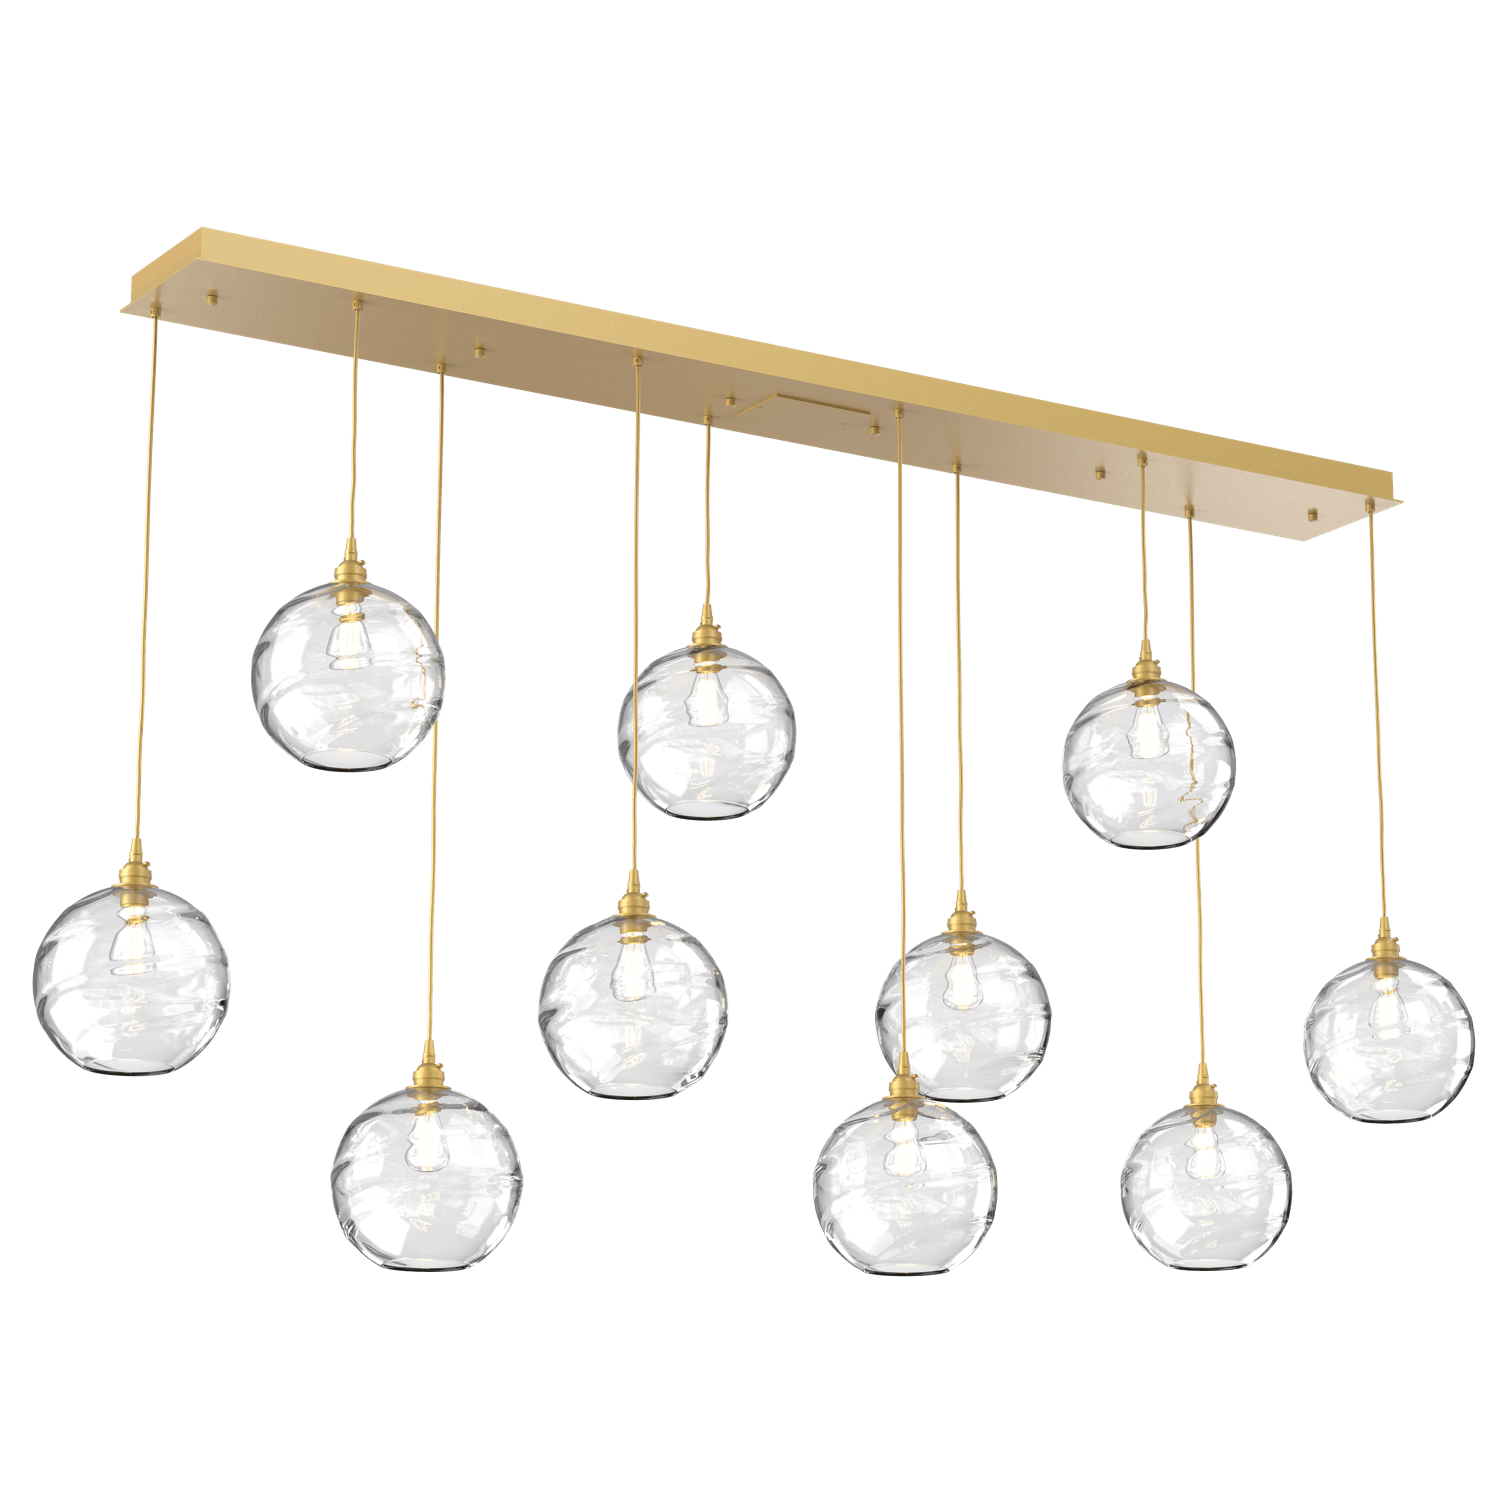 PLB0047-10-GB-OC-Hammerton-Studio-Optic-Blown-Glass-Terra-10-light-linear-pendant-chandelier-with-gilded-brass-finish-and-optic-clear-blown-glass-shades-and-incandescent-lamping